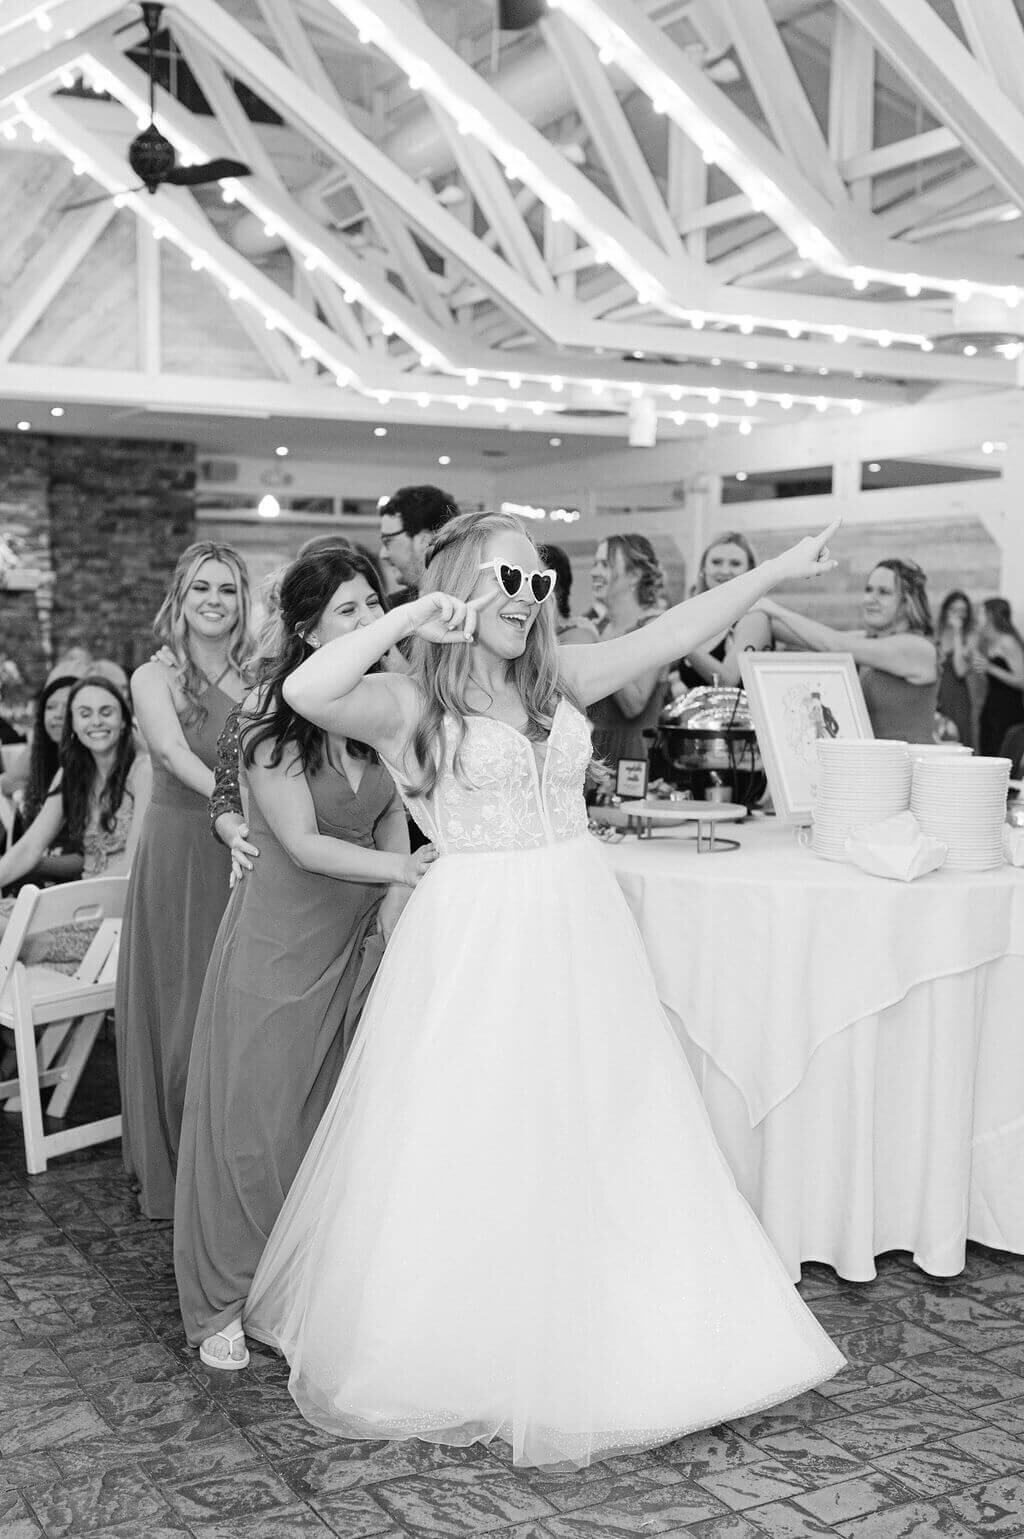 Bride wearing sunglasses and dancing at her wedding reception